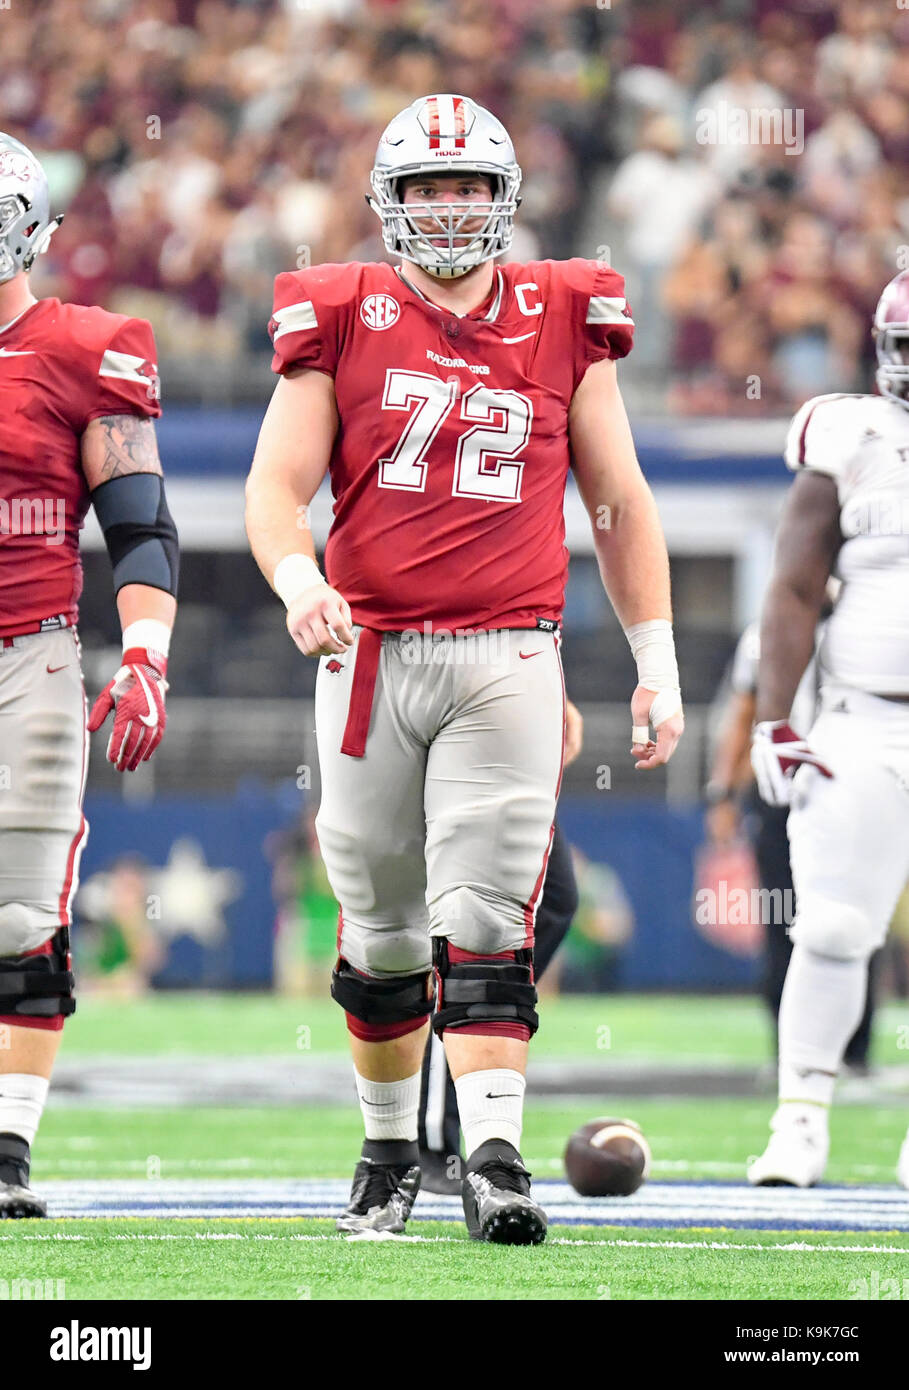 September 23, 2017: Arkansas Razorbacks offensive lineman Frank Ragnow #72  in the Southwest Classic NCAA Football game between the Texas A&M Aggies  and the University of Arkansas Razorbacks at AT&T Stadium in